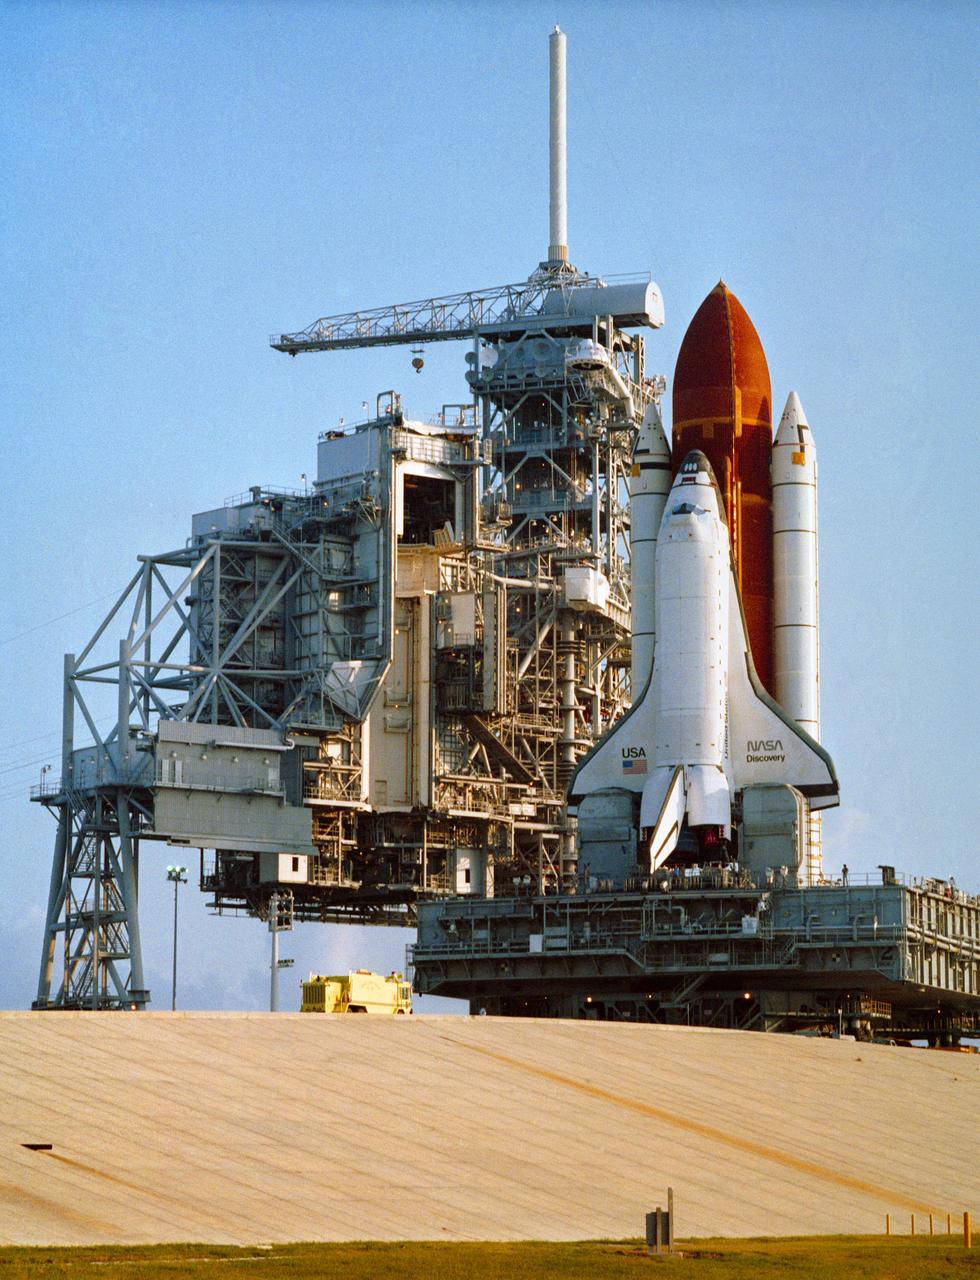 Sts-26 Discovery Reversnadel 